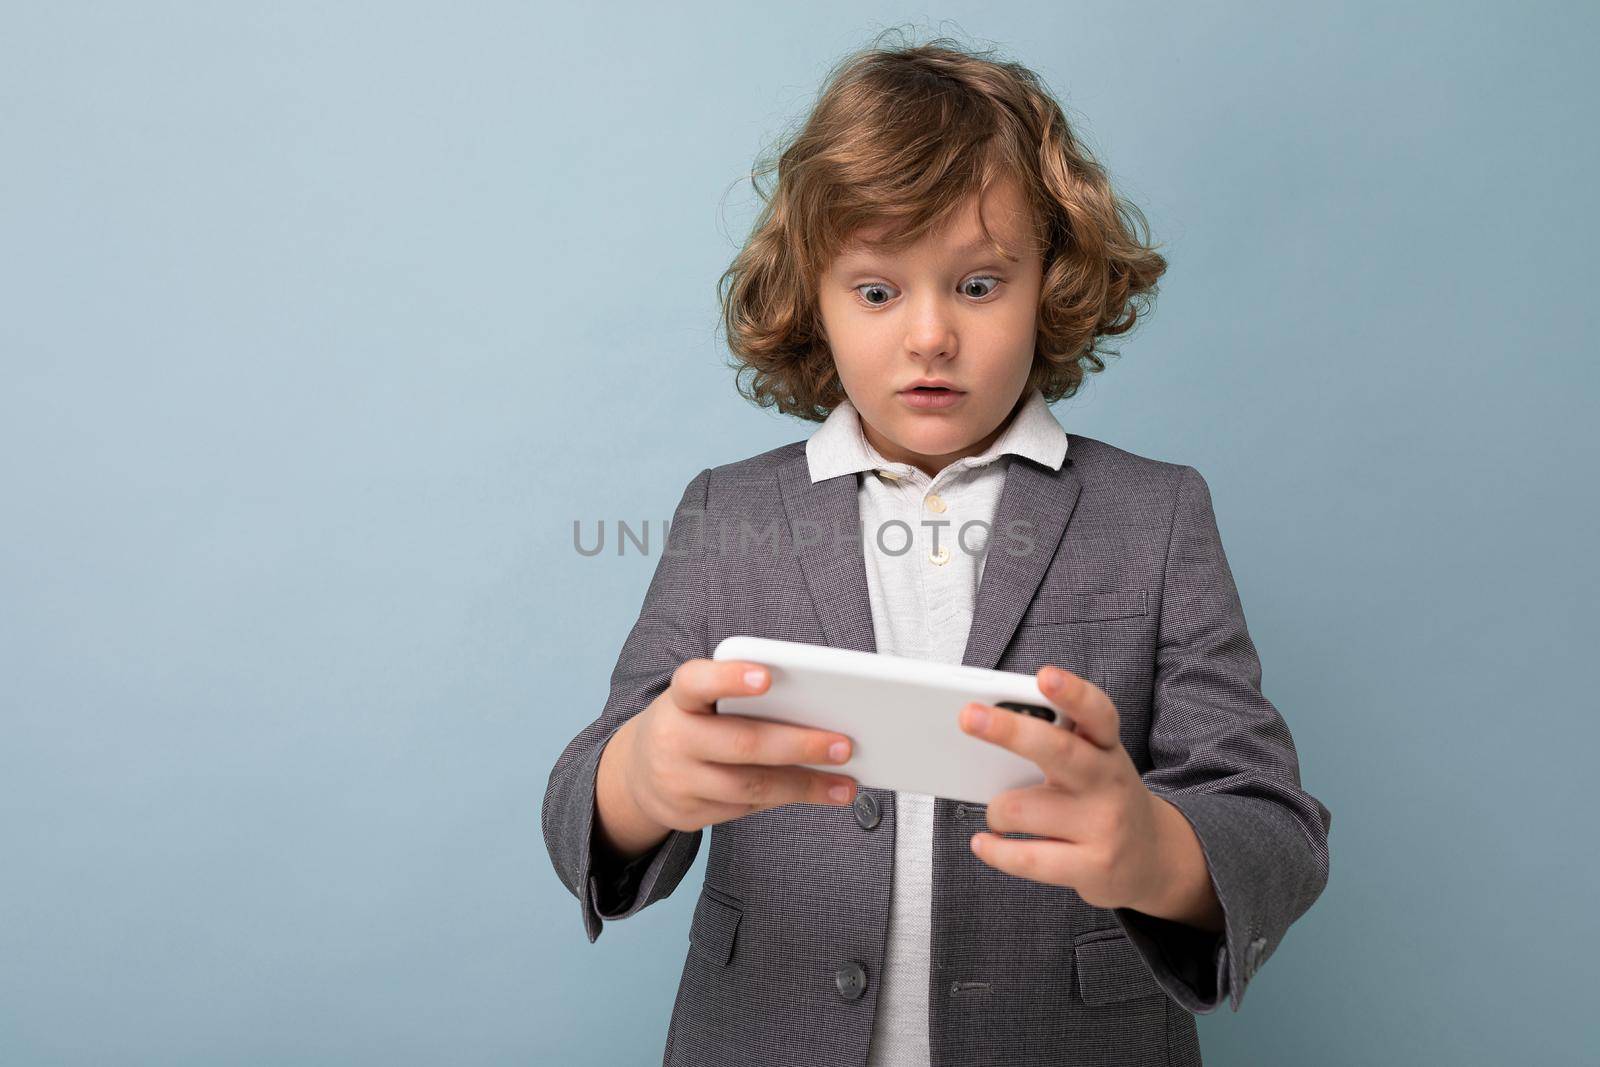 Photo shot of Handsome emotional child boy with curly hair wearing grey suit holding and using phone isolated over blue background looking at smartphone playing games.